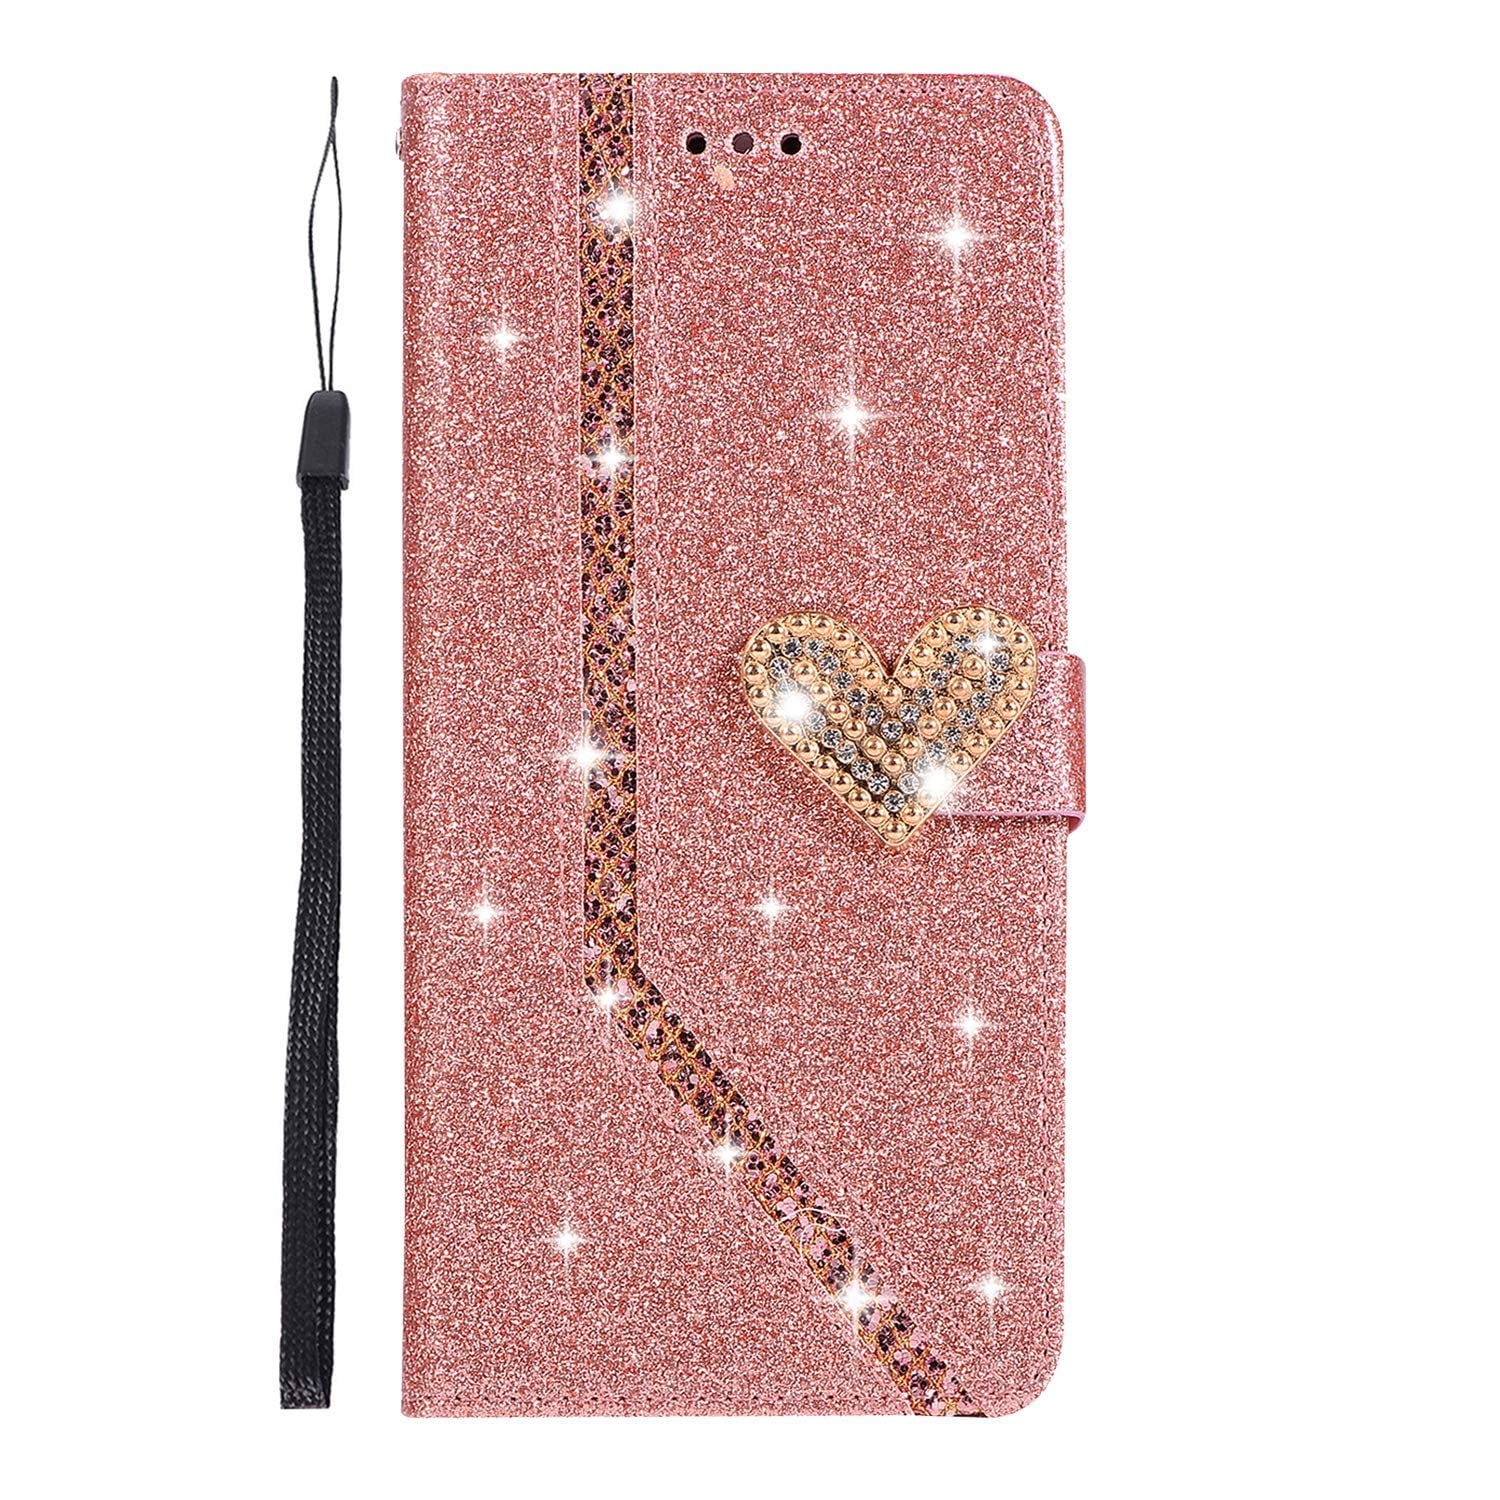 Uposao Compatible with Samsung Galaxy J6 Plus 2018 Case Bling Diamonds Glitter Love Heart Floral Embossing PU Leather Wallet Case with Kickstand Card Holder Flip Cover Magnetic Closure,Rose Gold 